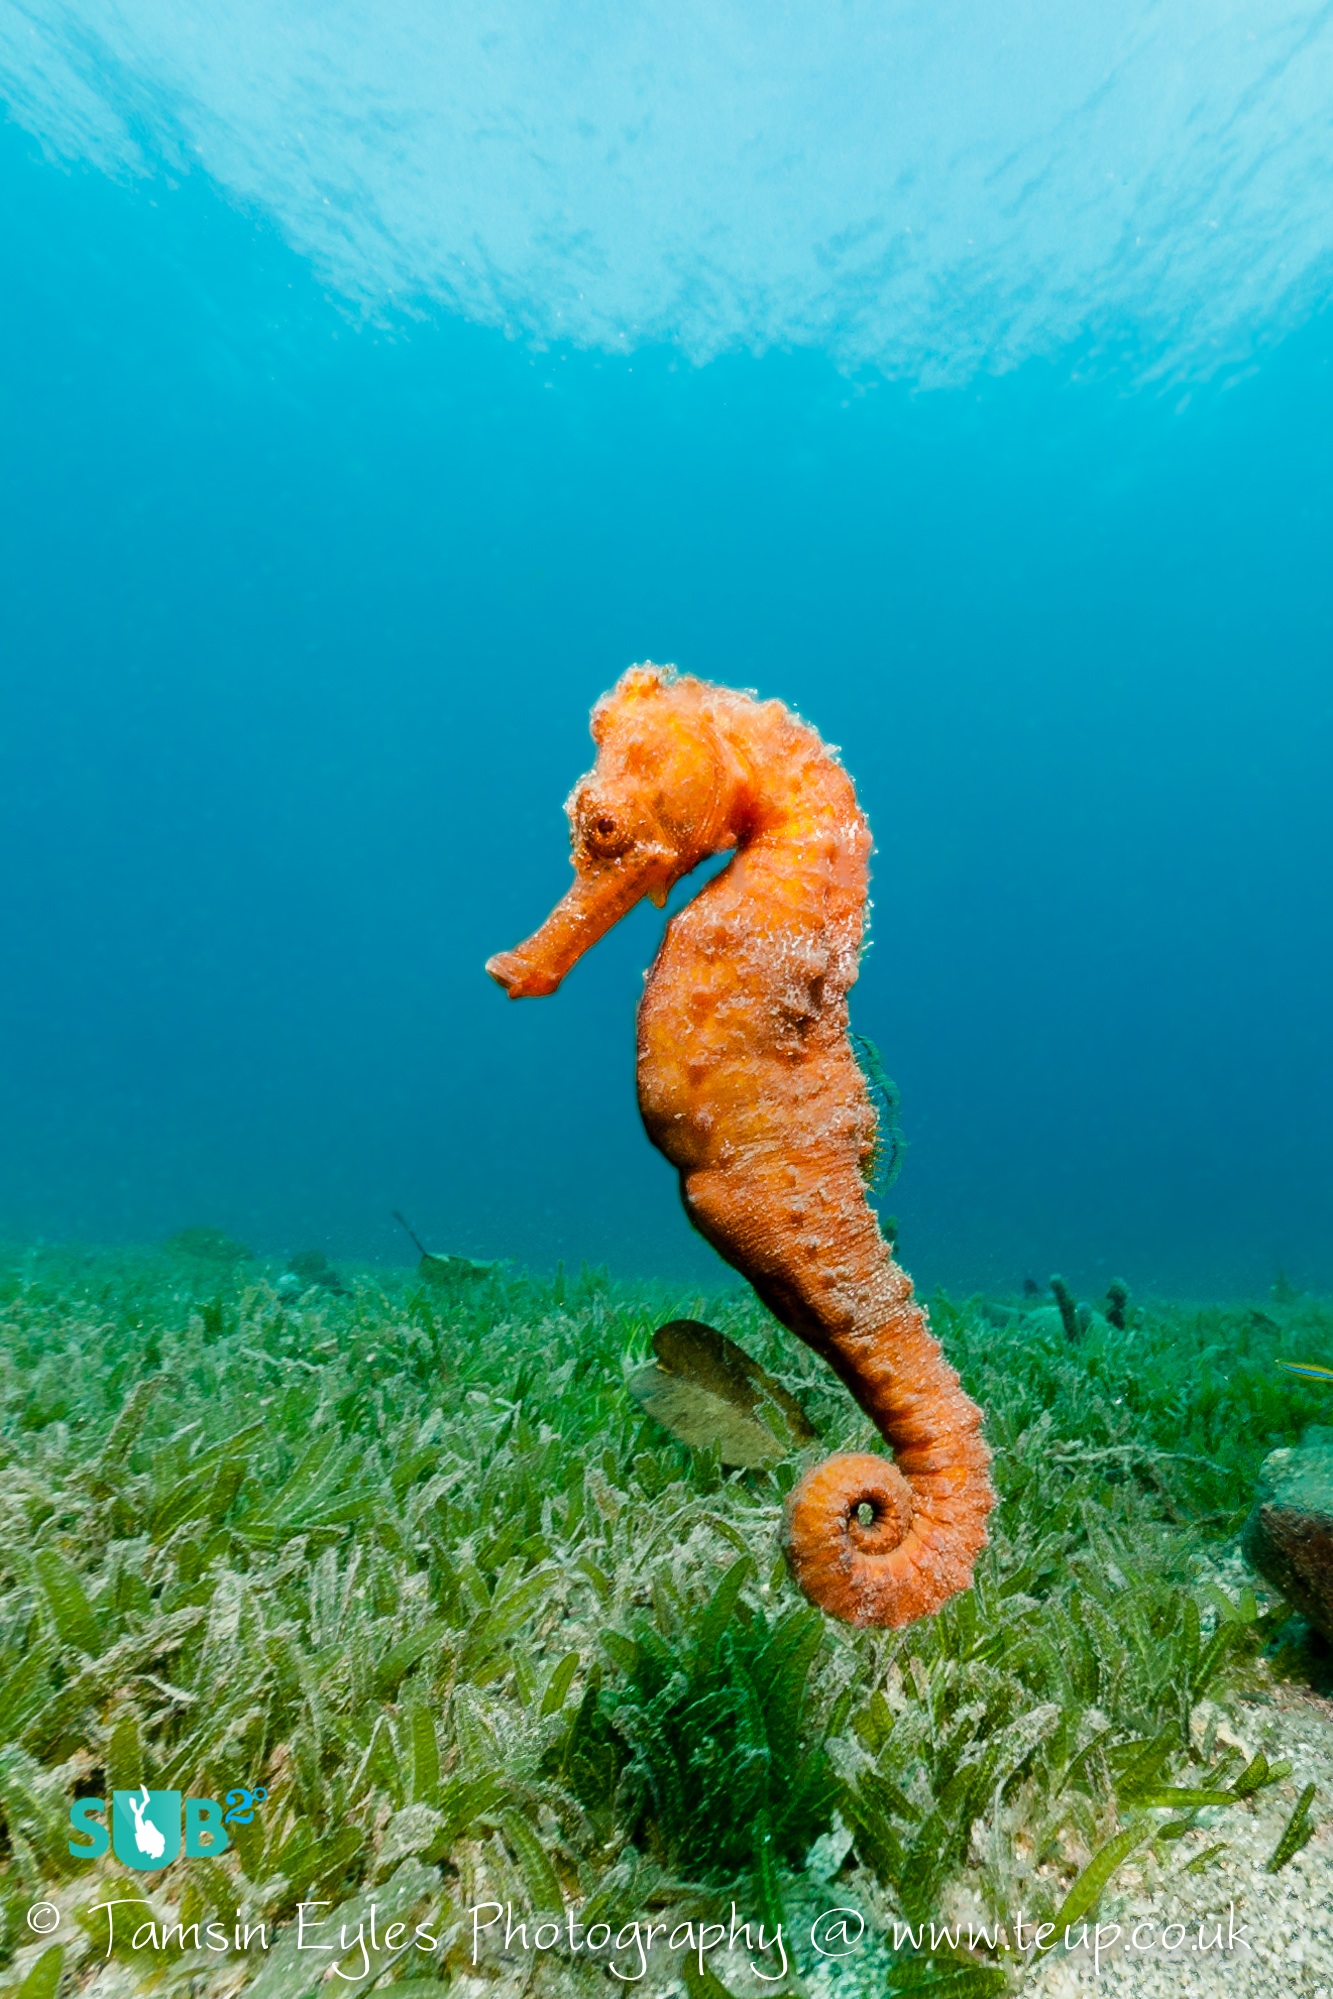 Many of the reefs around Bequia have resident seahorses. This gorgeous orange longsnout seahorse was investigating the seagrass by the reef. Photo courtesy of Tamsin Eyles.